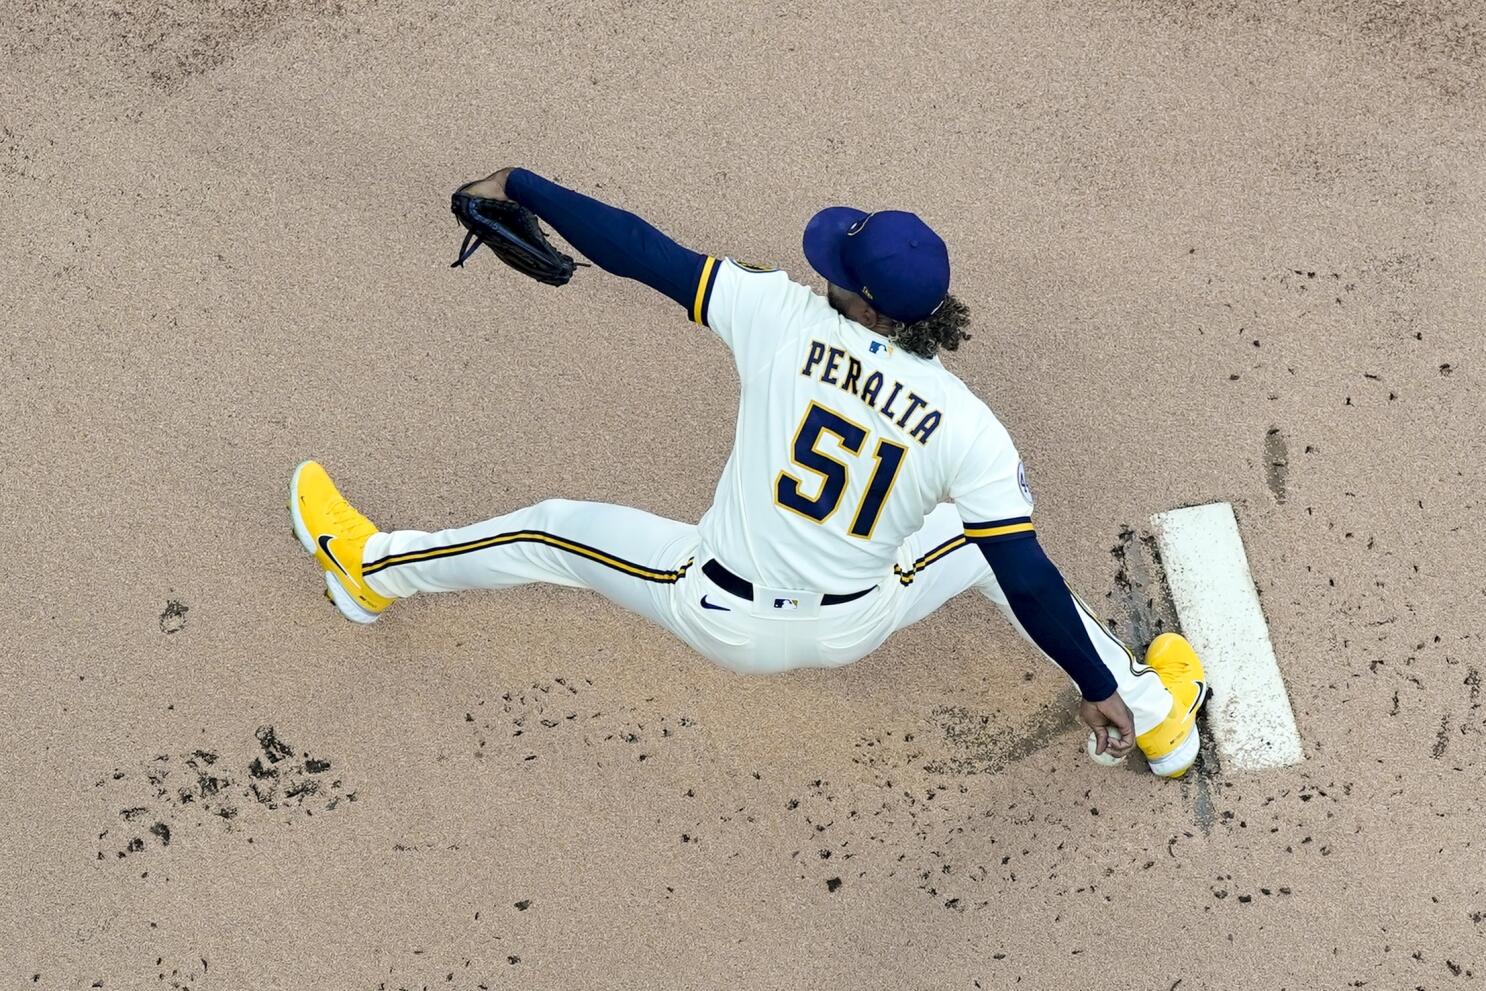 Freddy Peralta Strikes Out 7 in 6 Shutout Innings!, Milwaukee Brewers